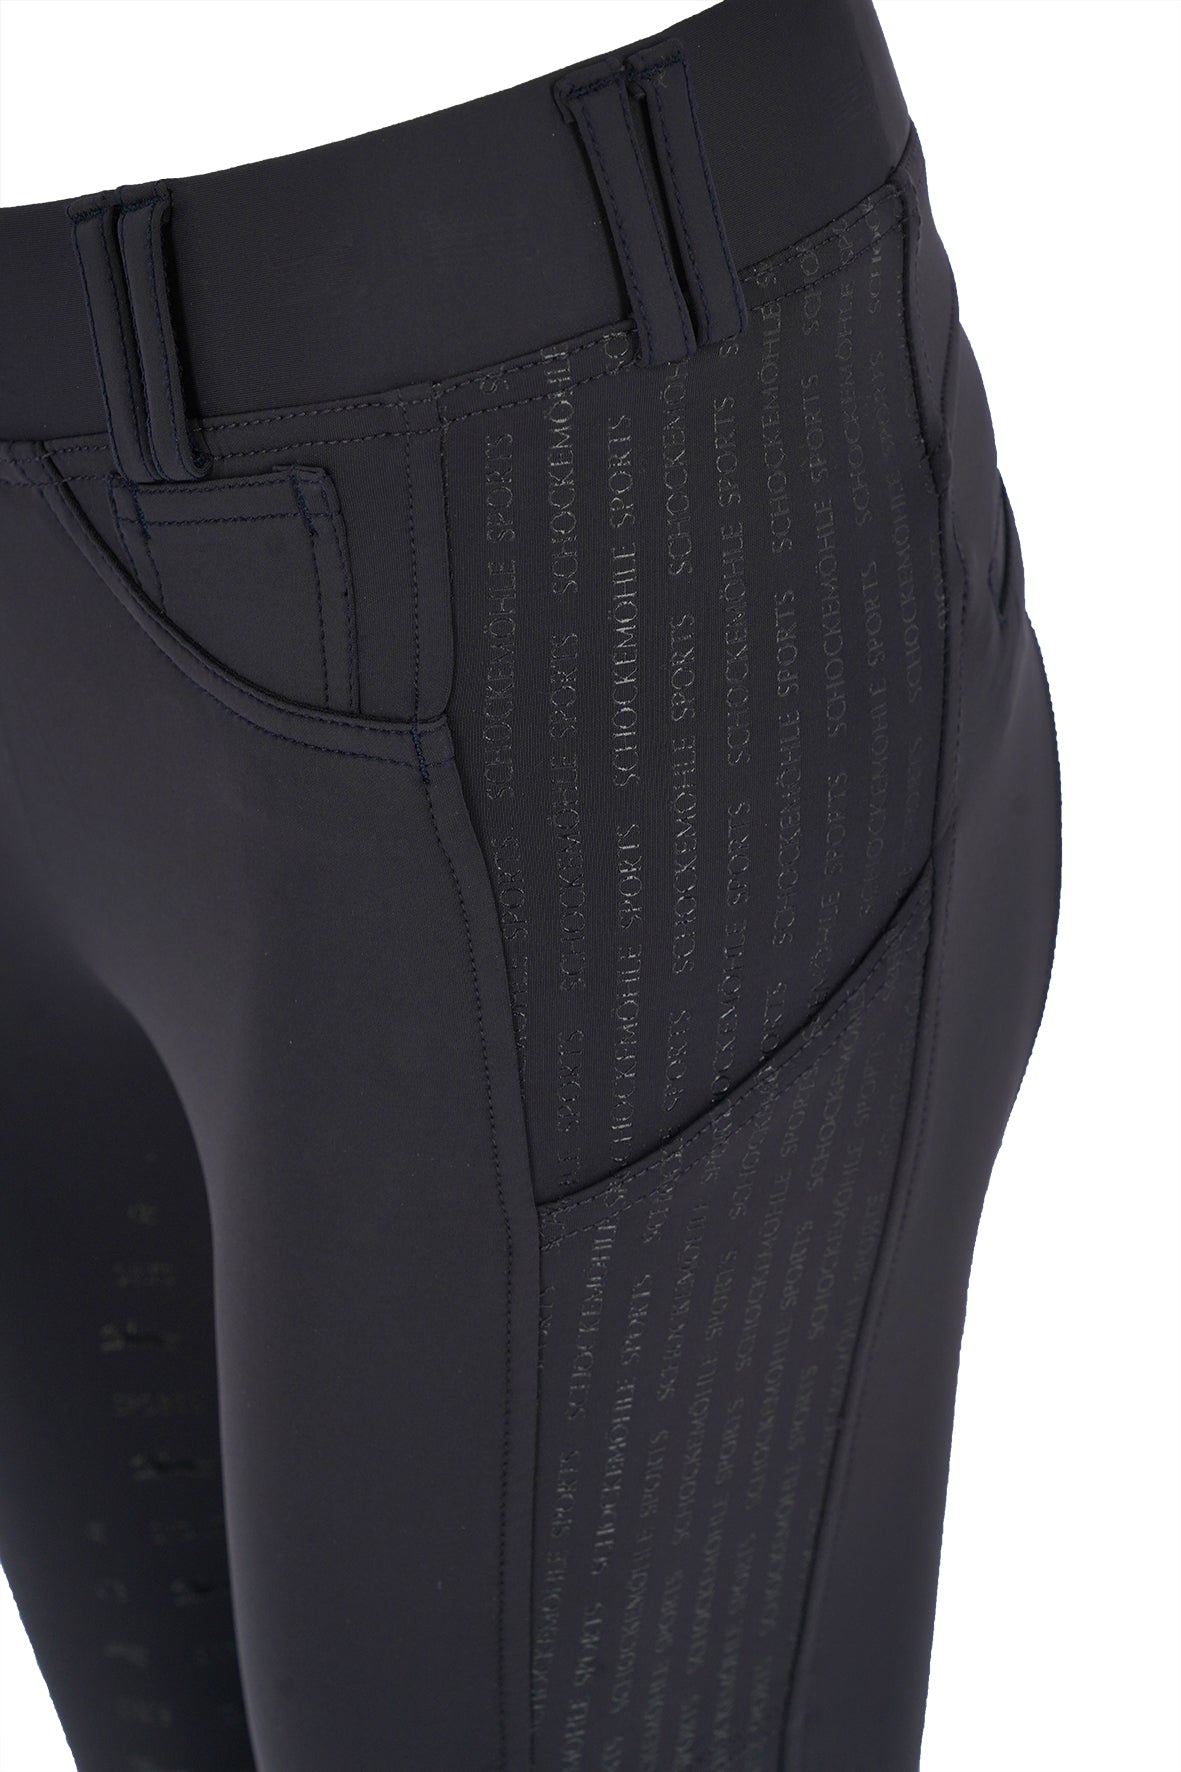 SCHOCKEMOHLE SPORTS SPORTY RIDING TIGHTS SS23